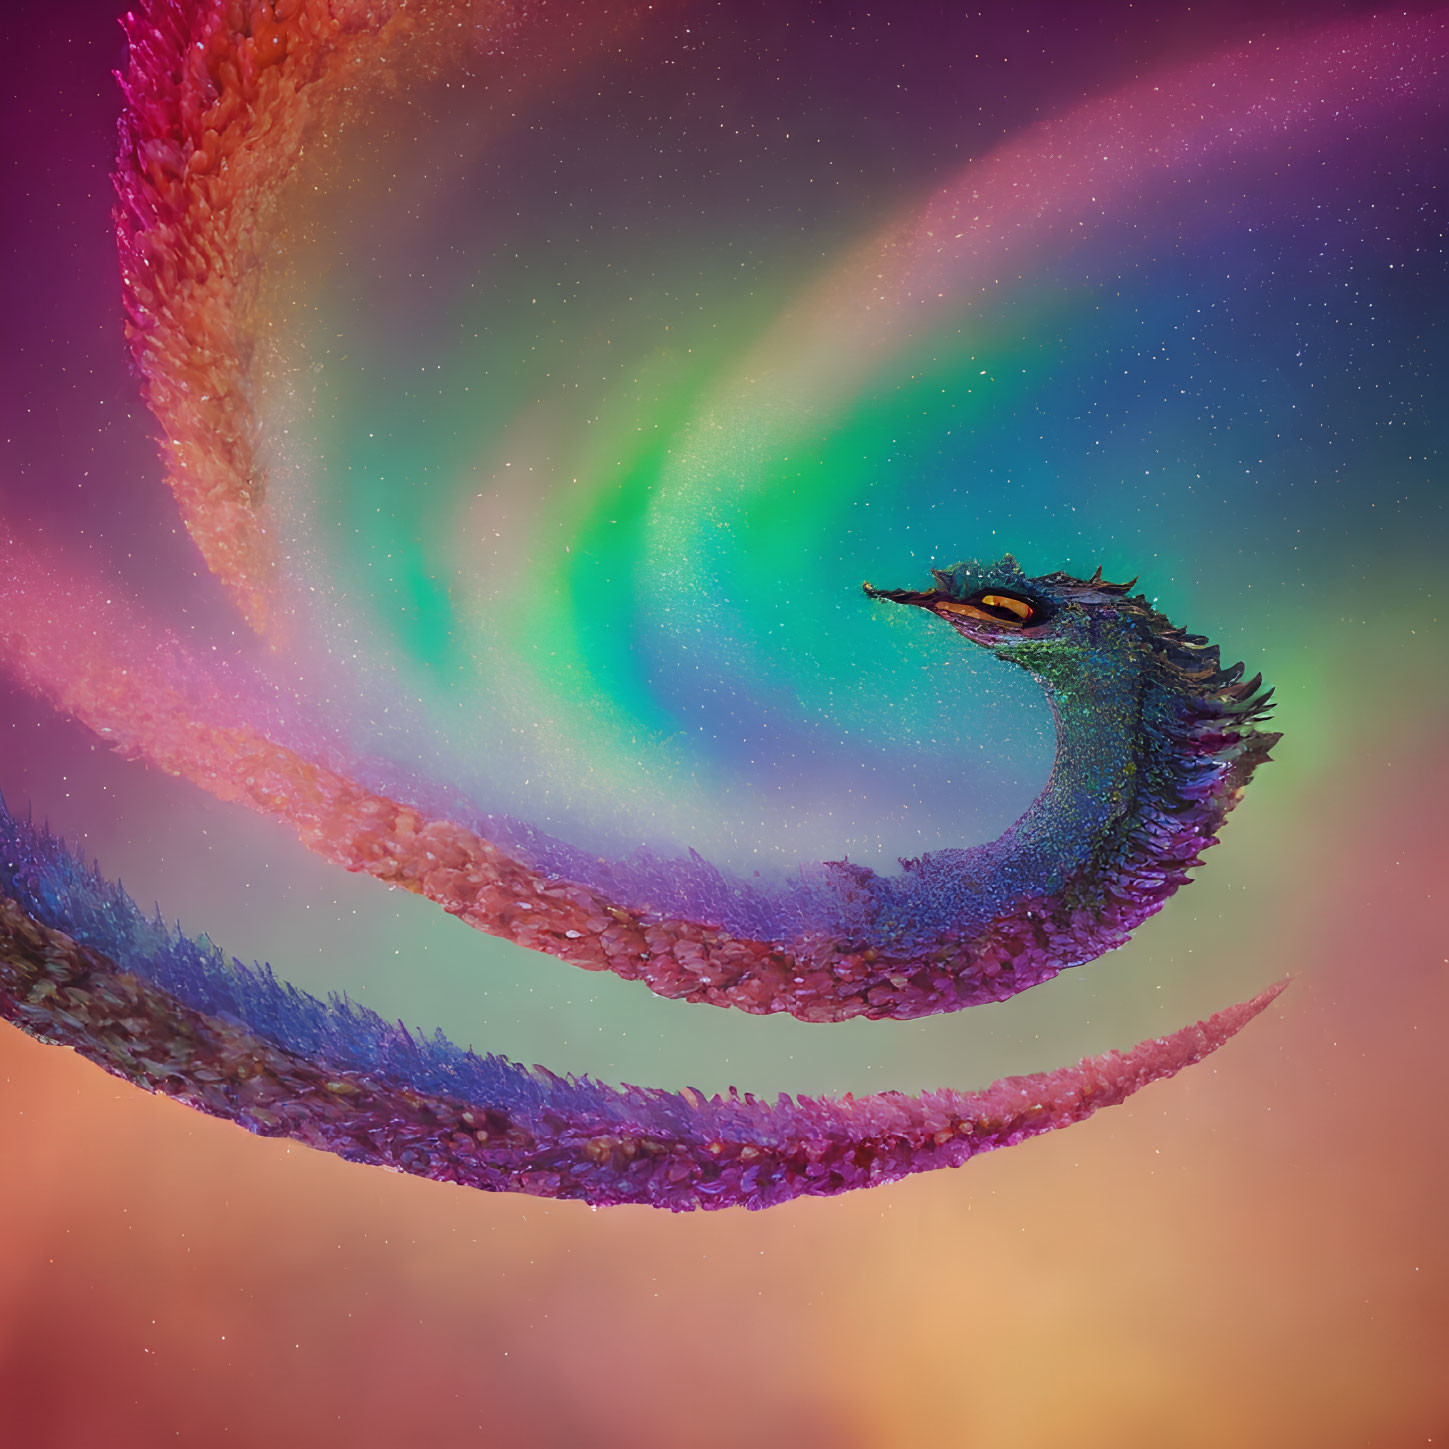 Colorful Digital Art: Peacock Feather in Cosmic Background